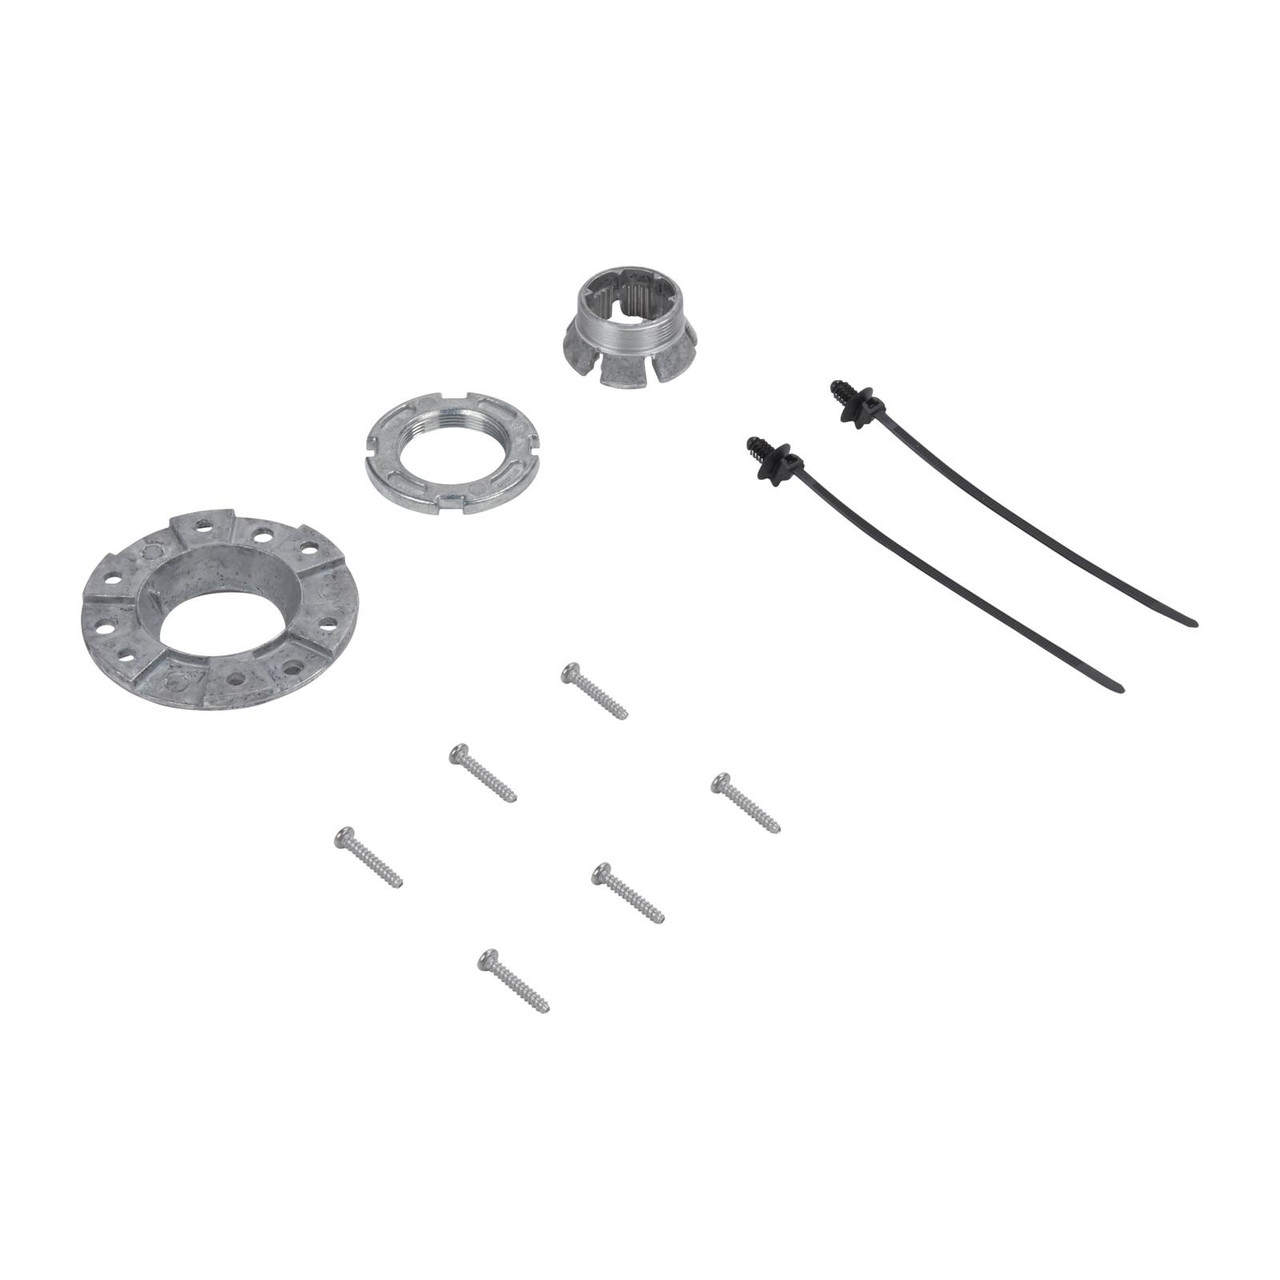  Replacement W10528947 Drive Hub Kit for Washing